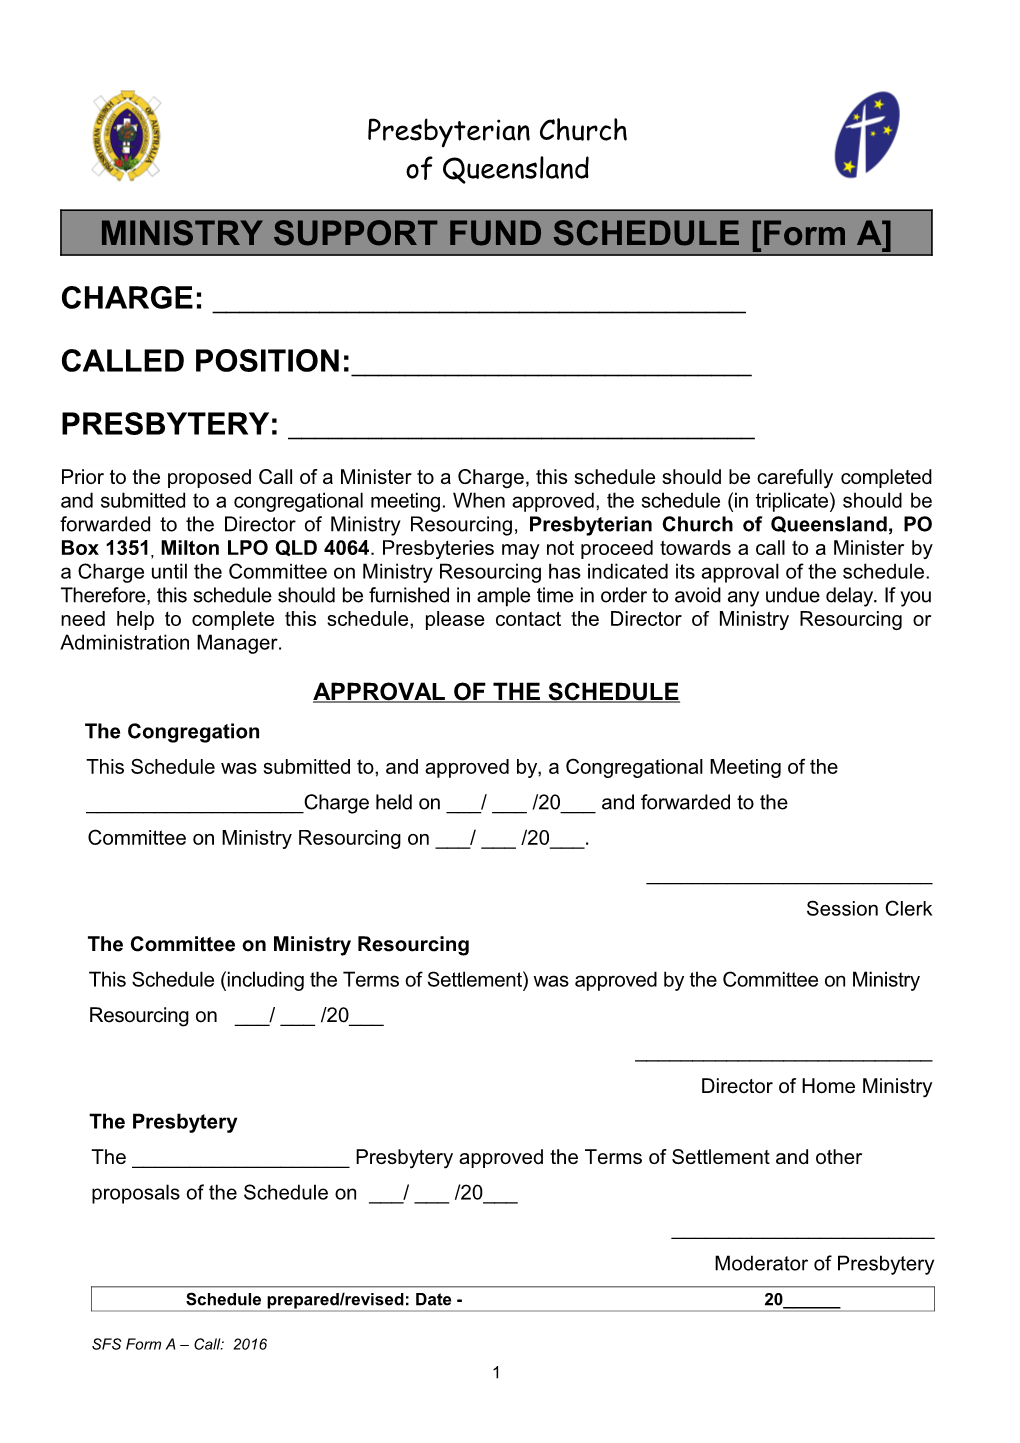 MINISTRY SUPPORT FUND SCHEDULE Form A